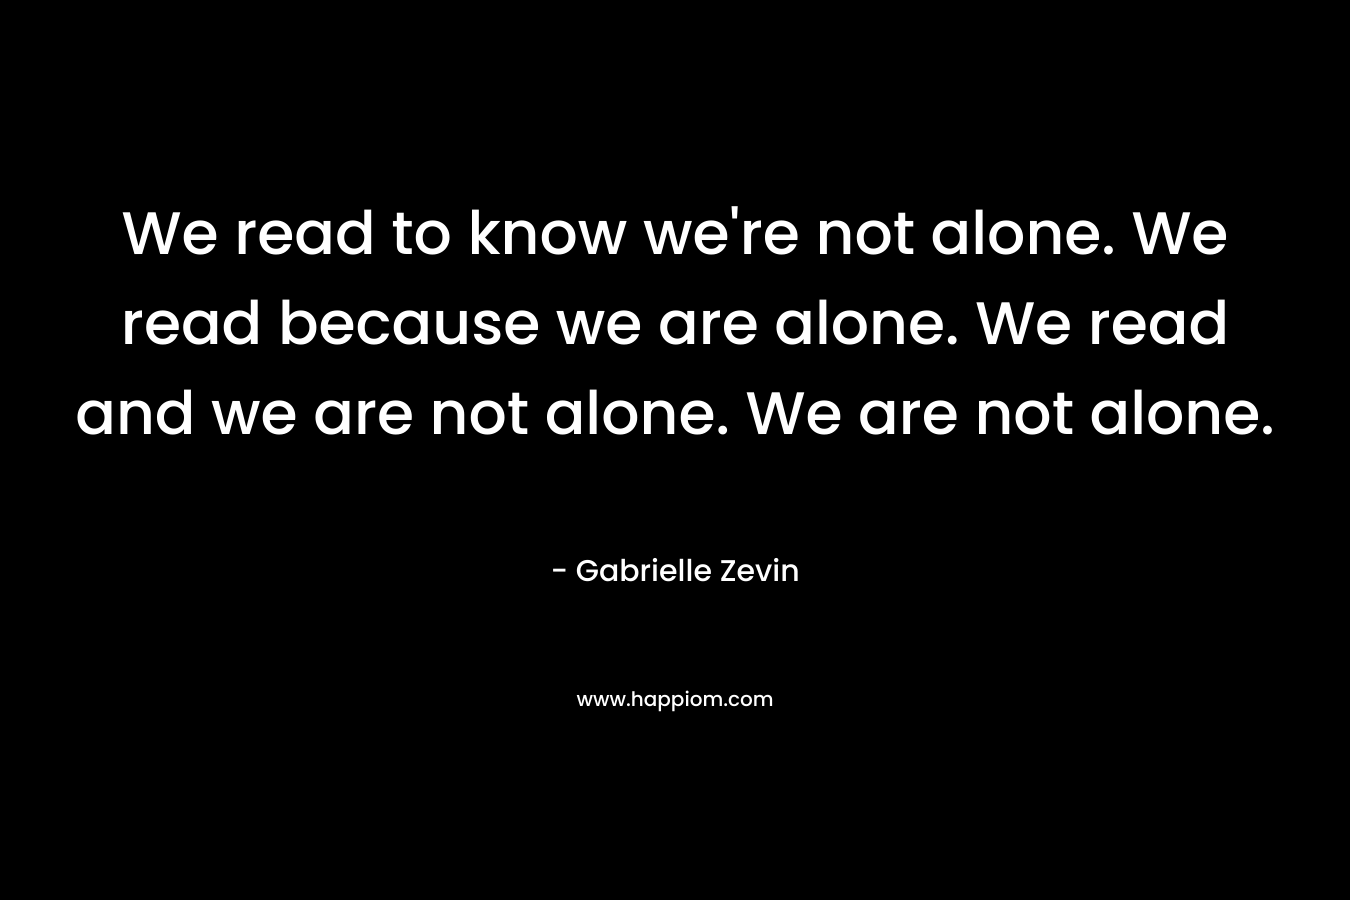 We read to know we're not alone. We read because we are alone. We read and we are not alone. We are not alone.